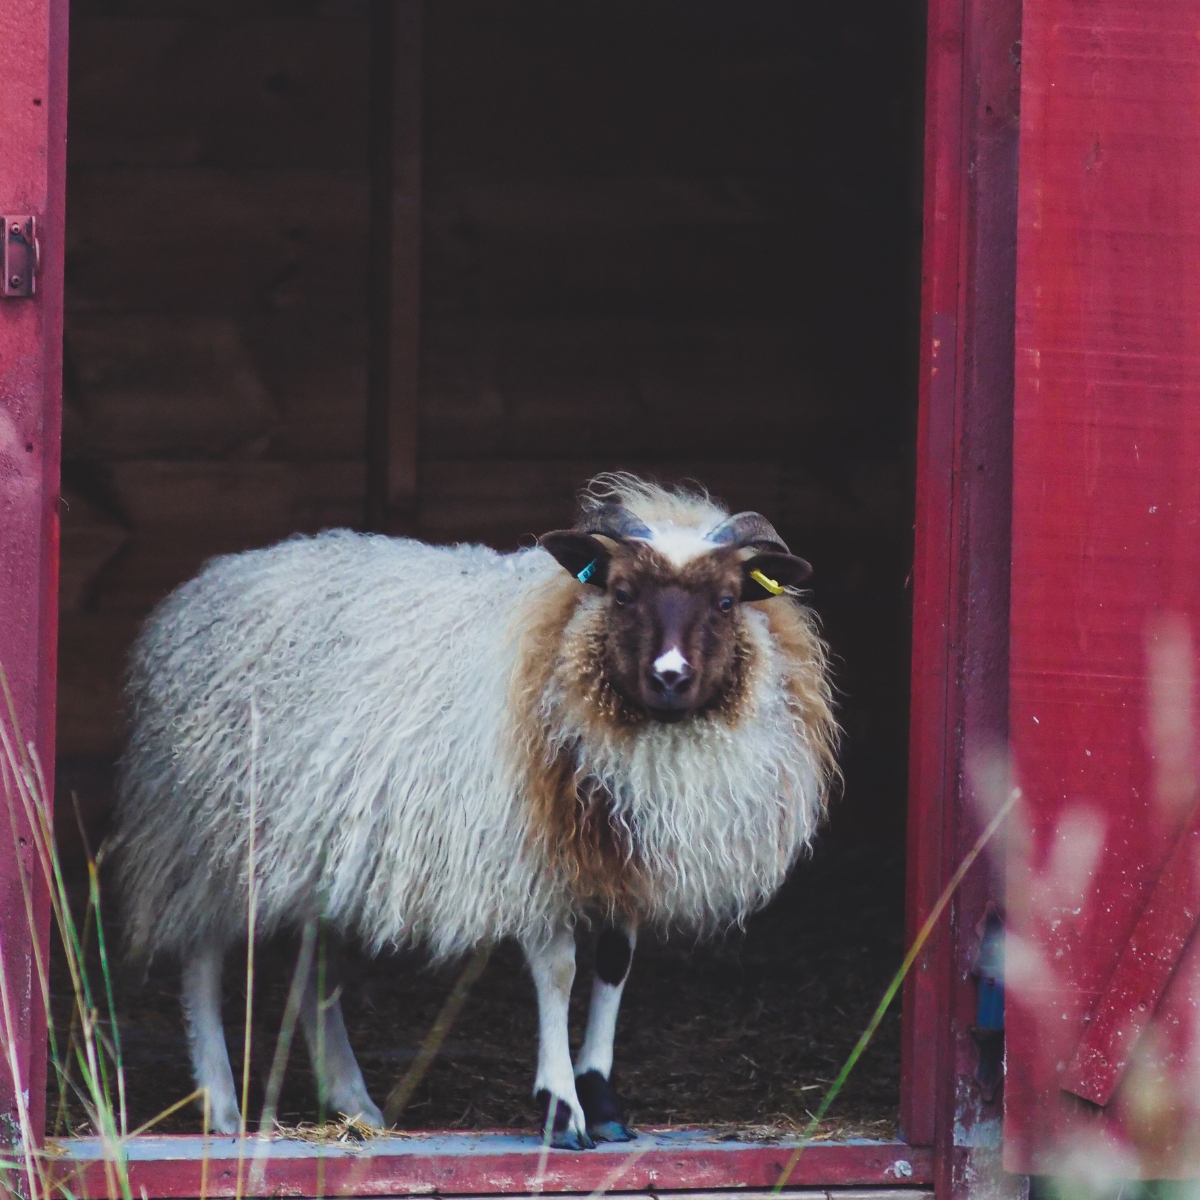 A brown and white Icelandic ewe lamb with horns and long, curly wool stands in the doorway of a red sheep shed barn.